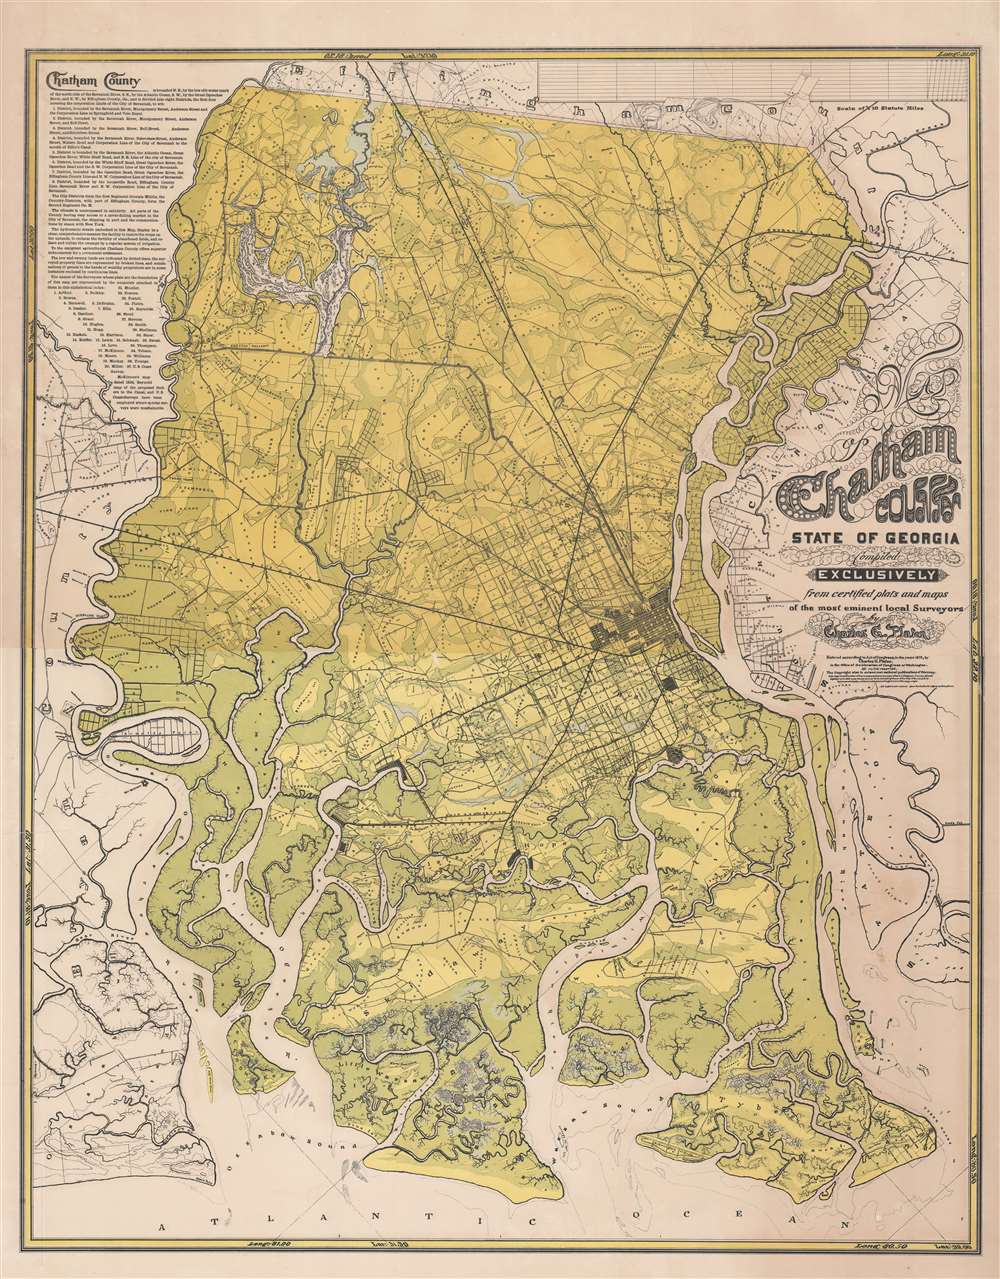 Chatham County State of Georgia Compiled Exclusively from certified plats and maps of the most eminent local surveyors by Charles G. Platon. - Main View